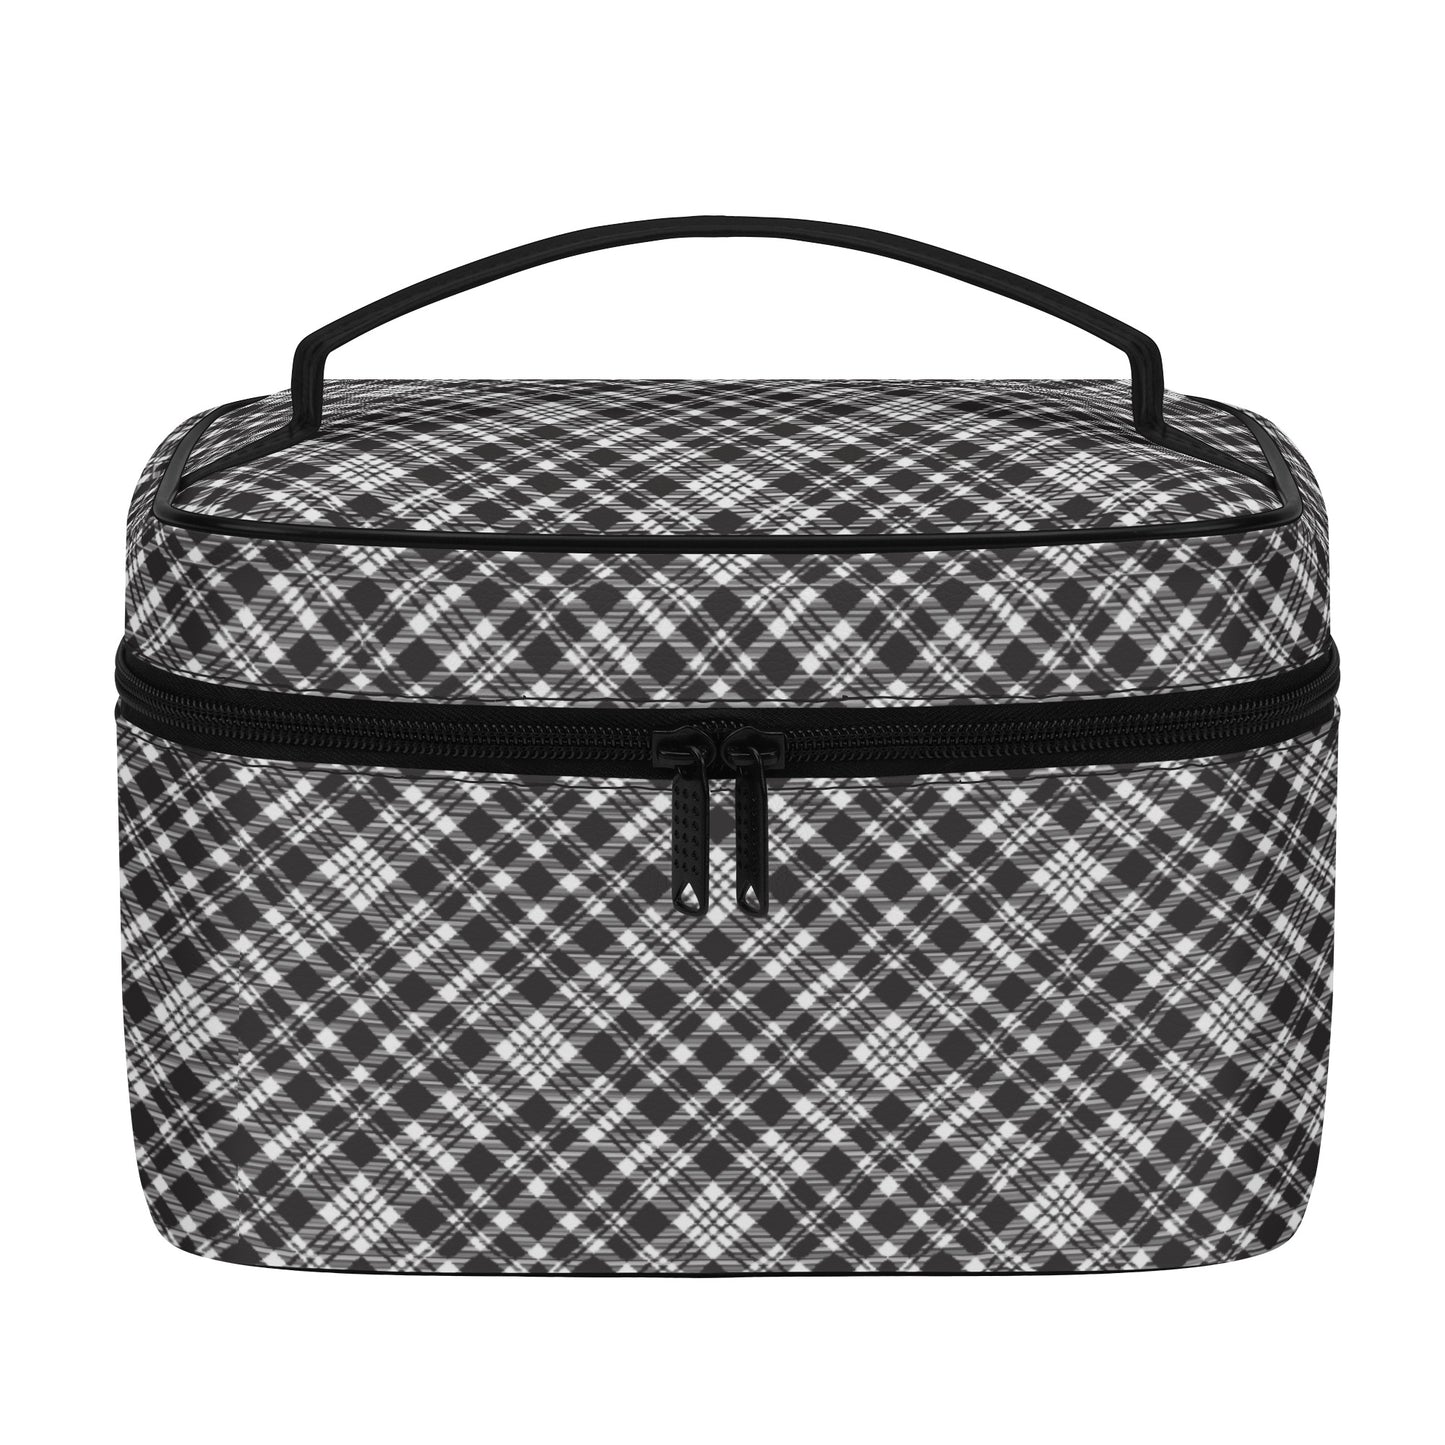 Chic Contrasting Black & Grey Argyle Plaid Pattern  - Cosmetic or Toiletry Bag Faux Leather (PU)